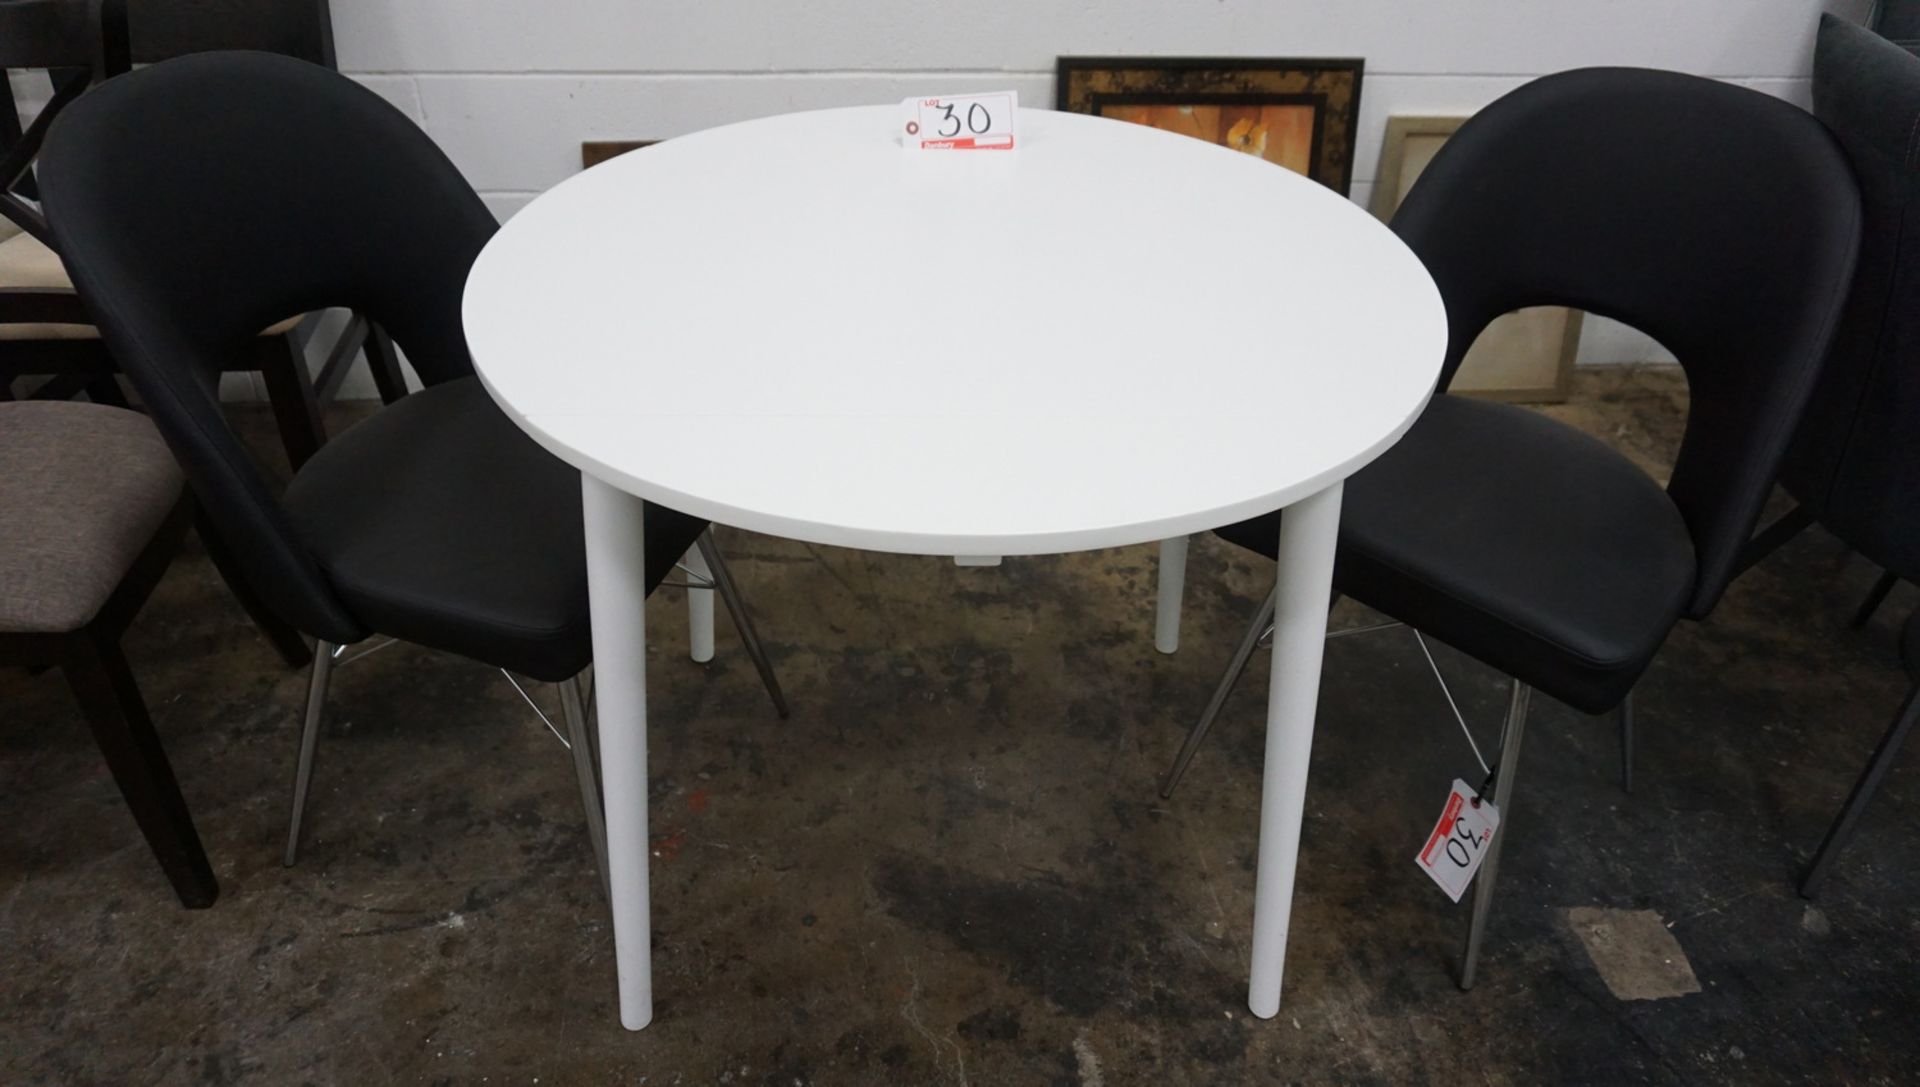 LOT - WHITE ROUND DINING TABLE W/ (2) BLACK DINING CHAIRS W/ CHROME TUBE LEGS